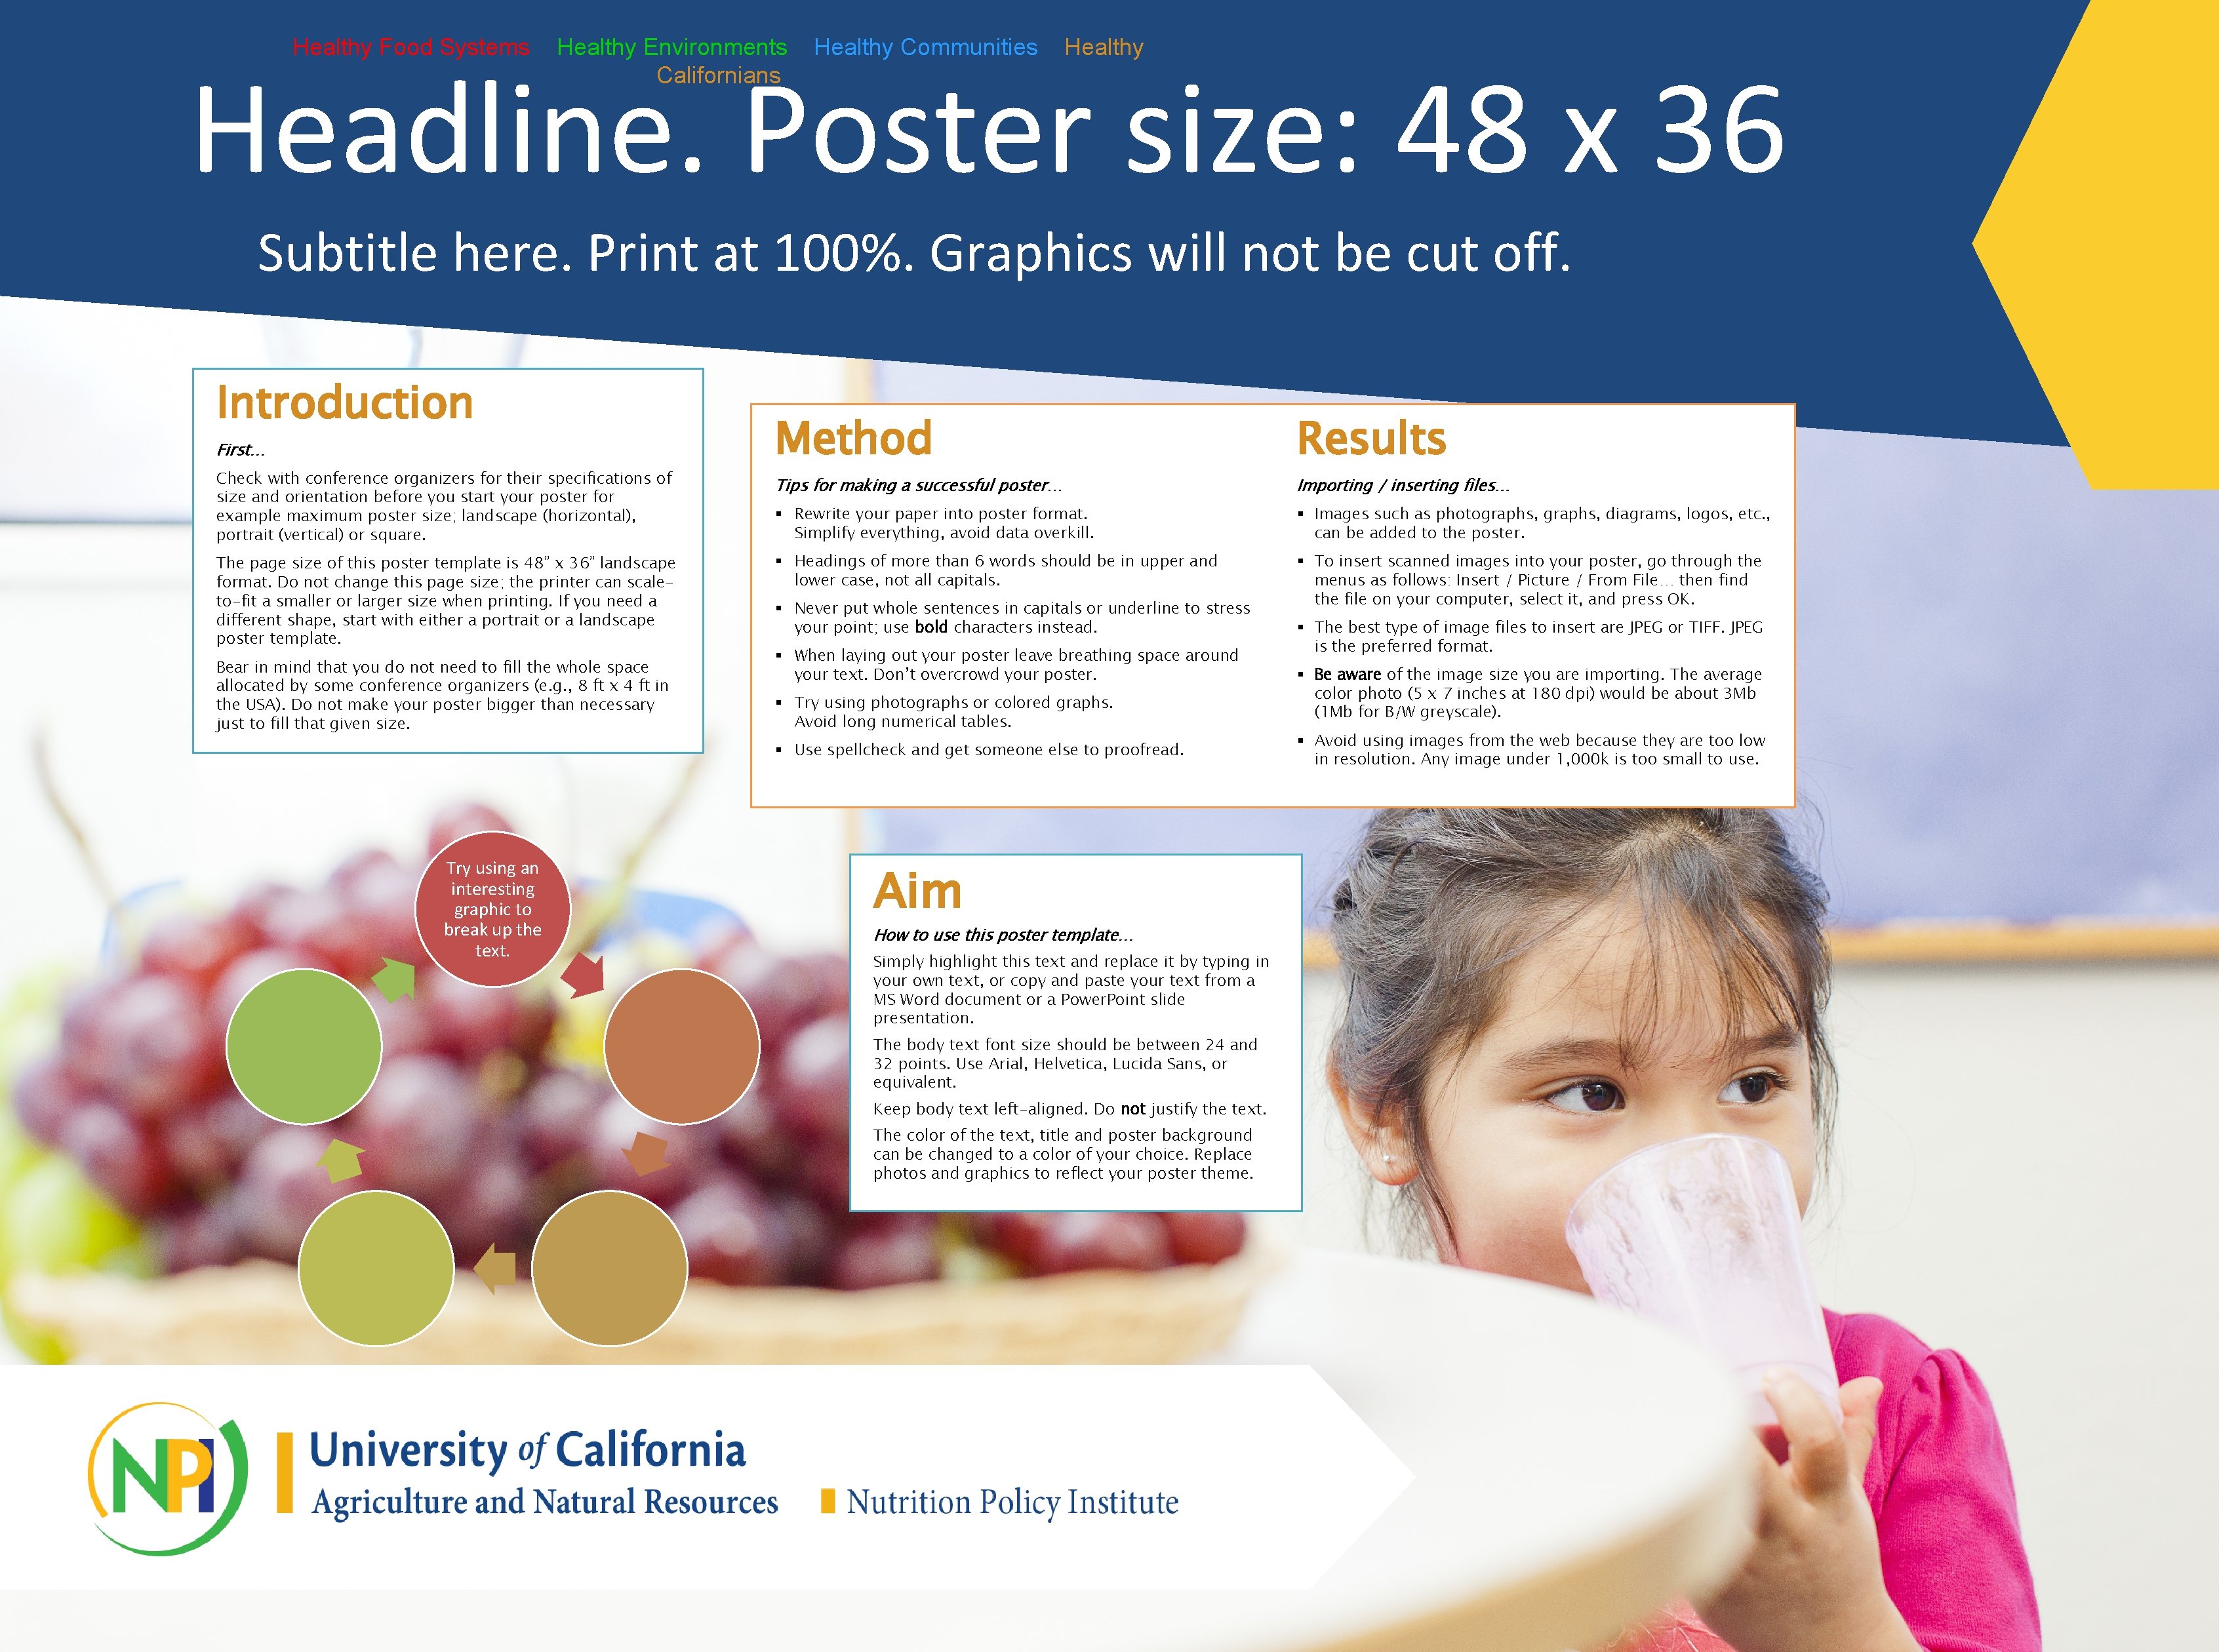 Healthy Food Systems Healthy Environments Californians Healthy Communities Healthy Headline. Poster size: 48 x